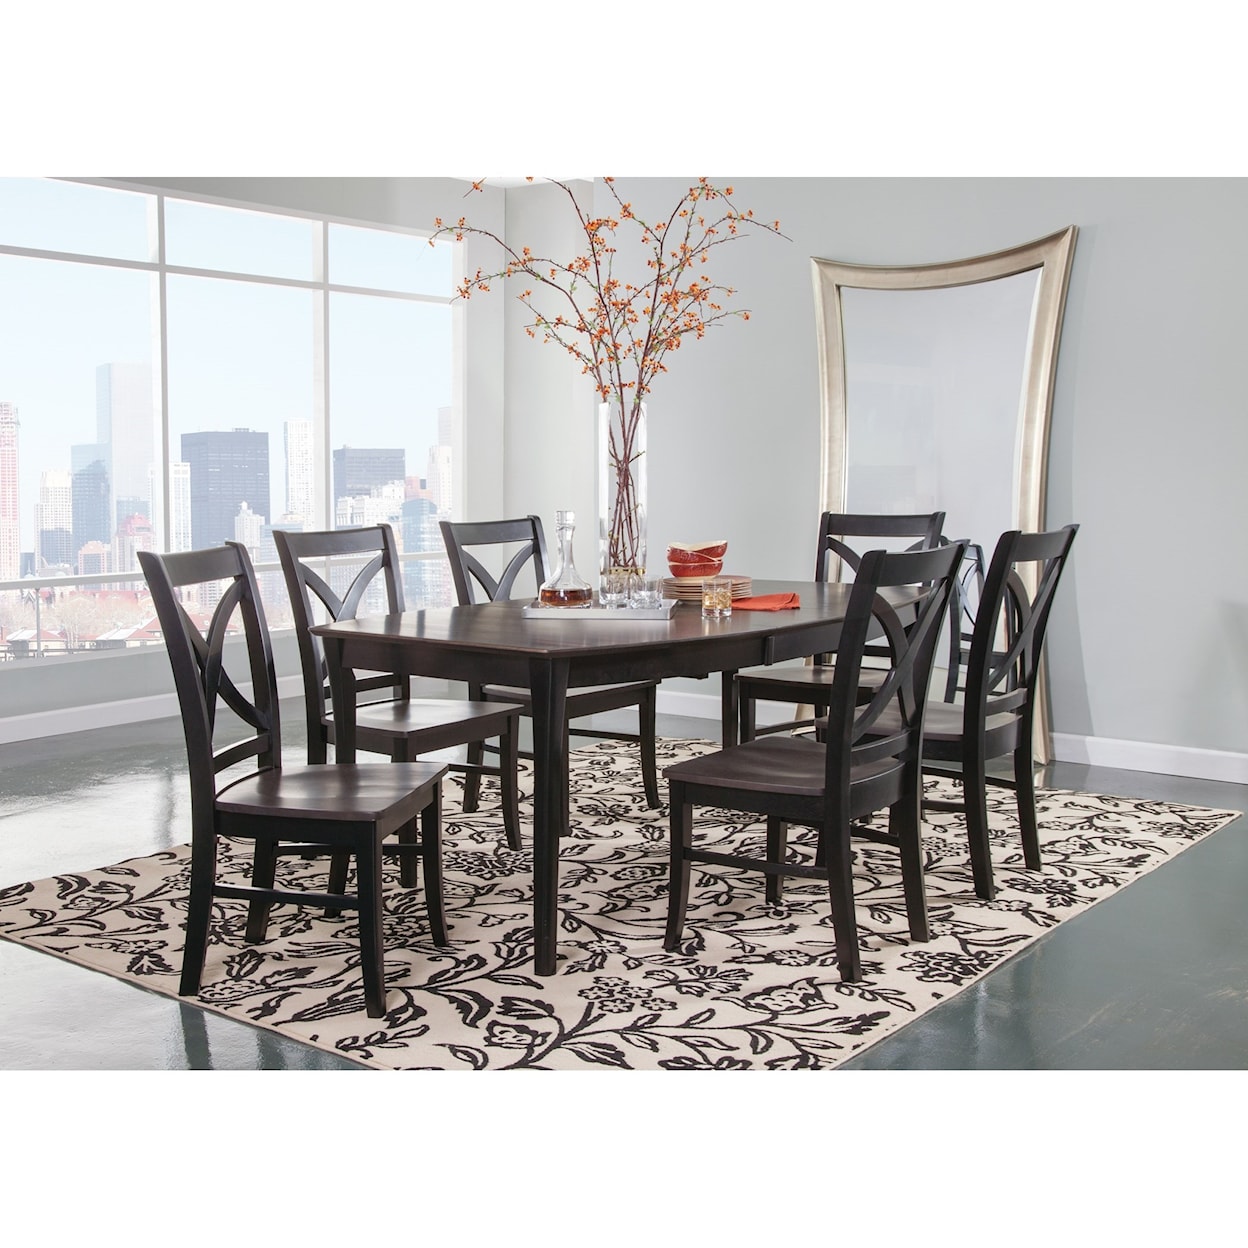 Carolina Dinette Cosmopolitan Table and Chair Set